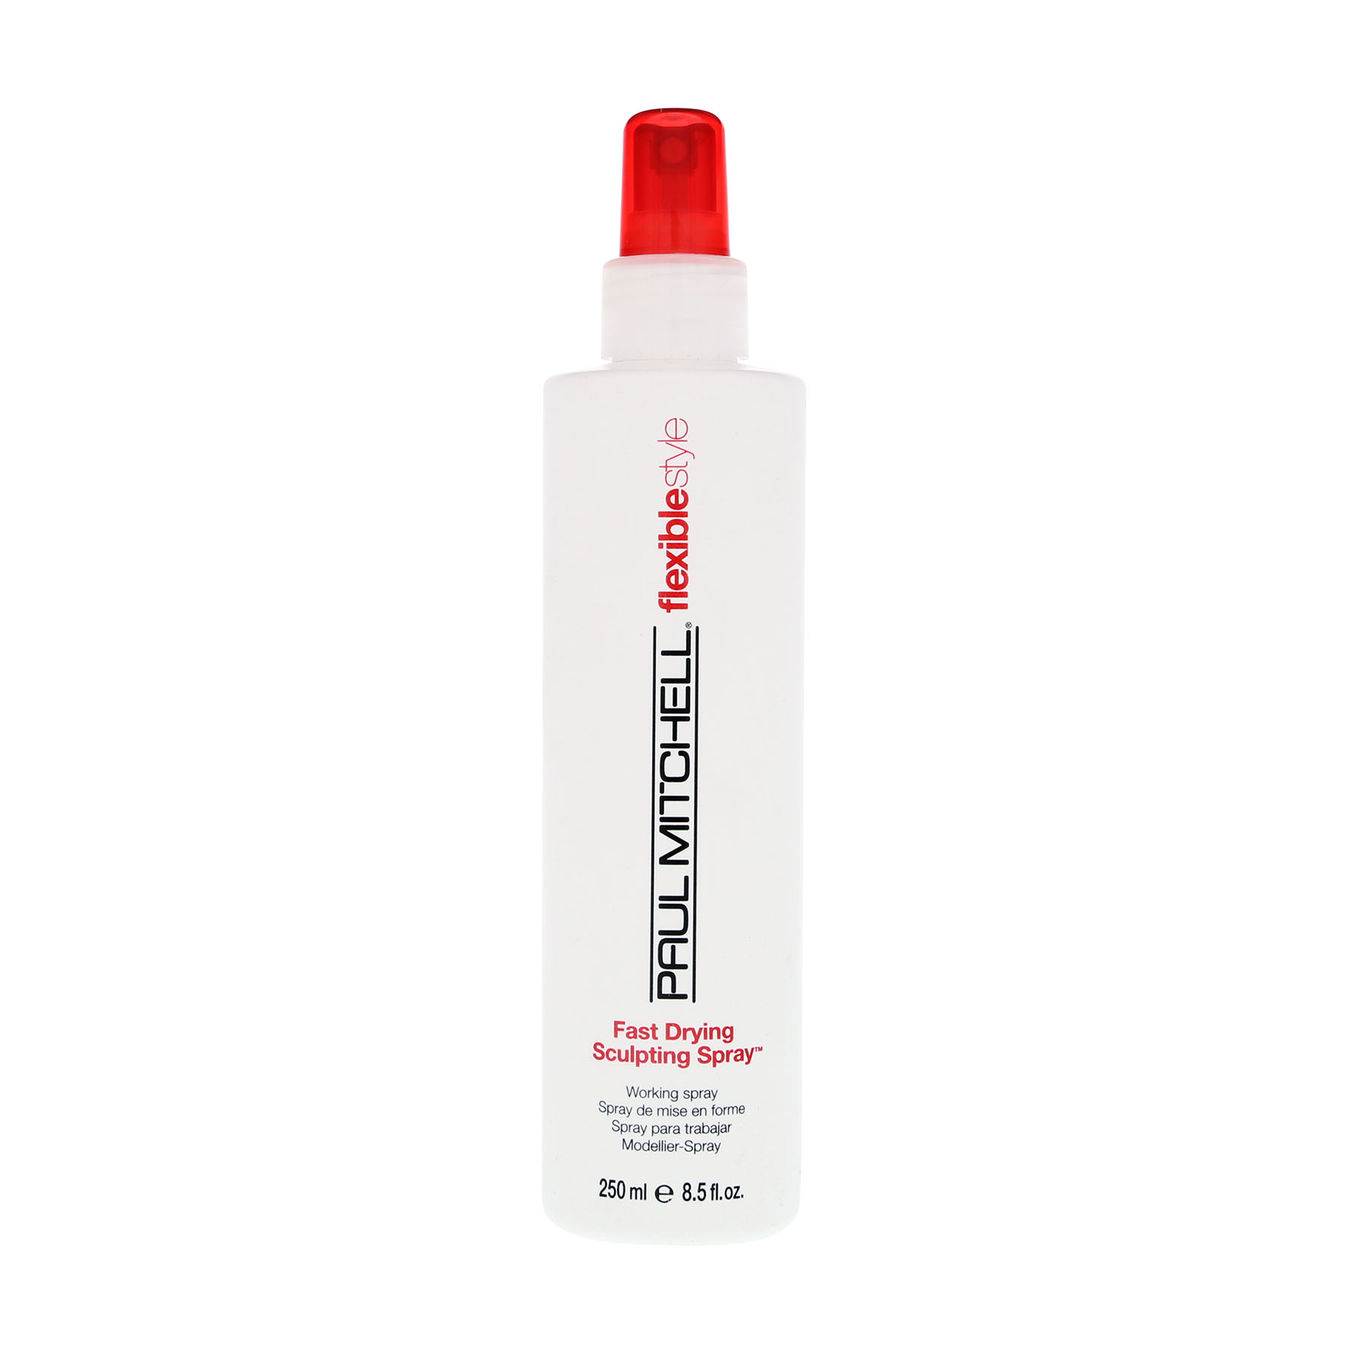 Paul Mitchell FlexibleStyle Fast Drying Sculpting Spray